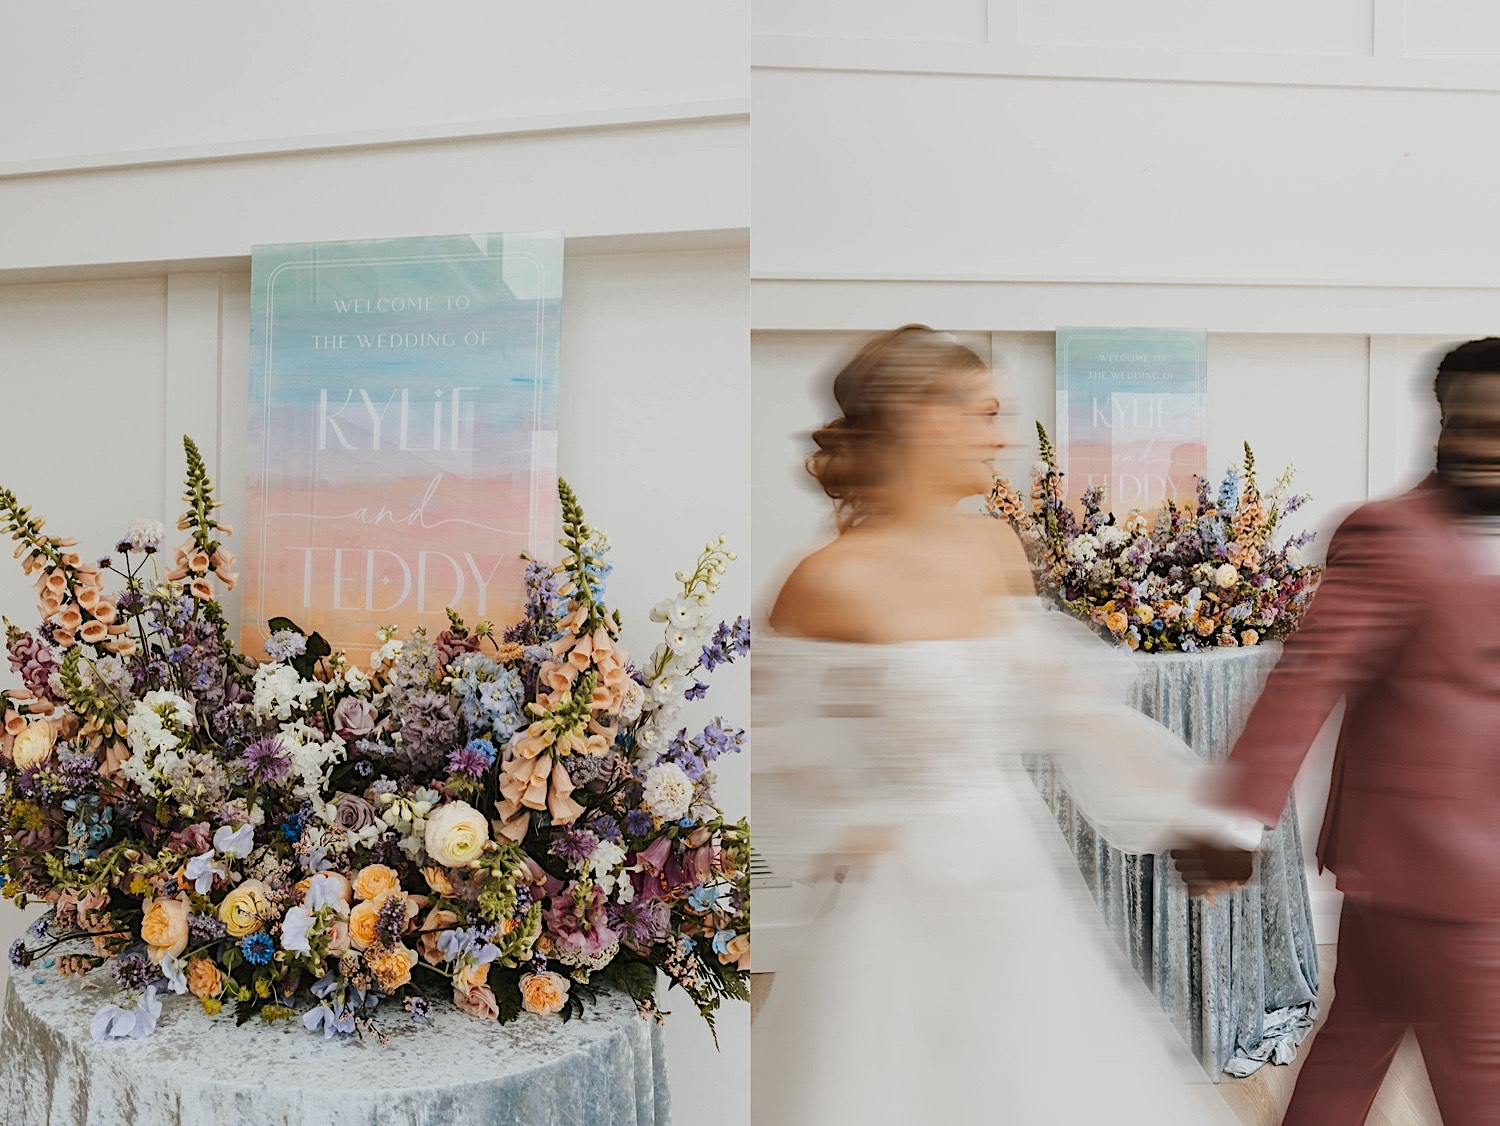 2 photos side by side, the left is of a sign that reads "Kylie and Teddy" behind a large array of flowers, the right photo is of the bride and groom out of focus walking in front of the same display